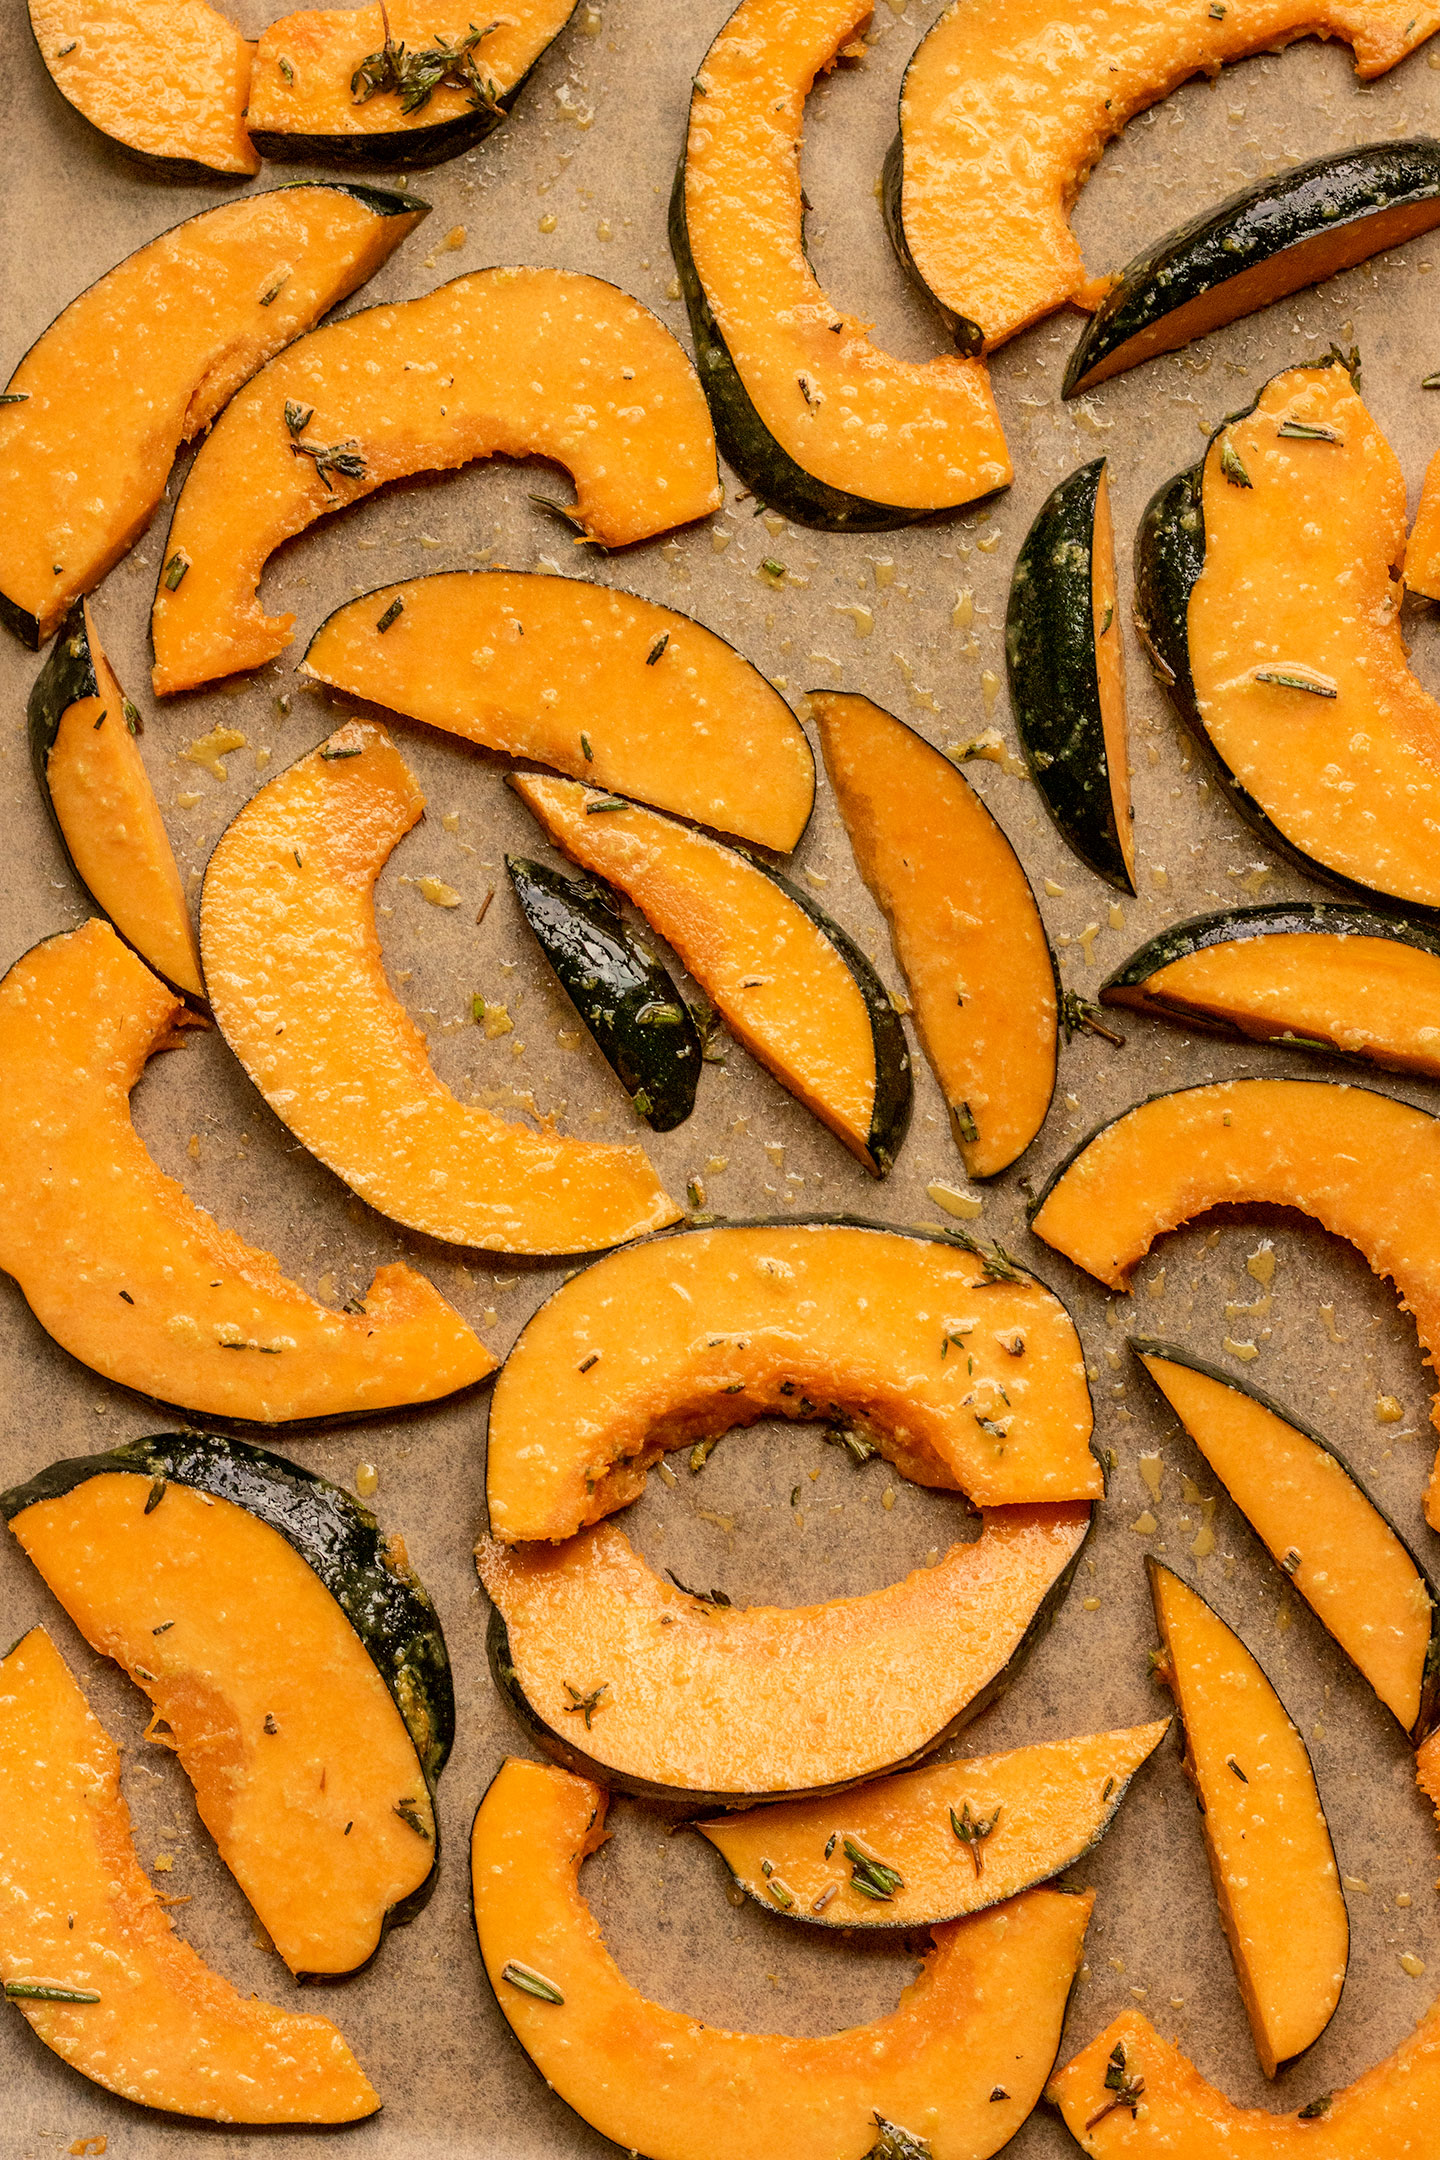 Garlic rosemary coated acorn squash spread out on a parchment lined baking tray.